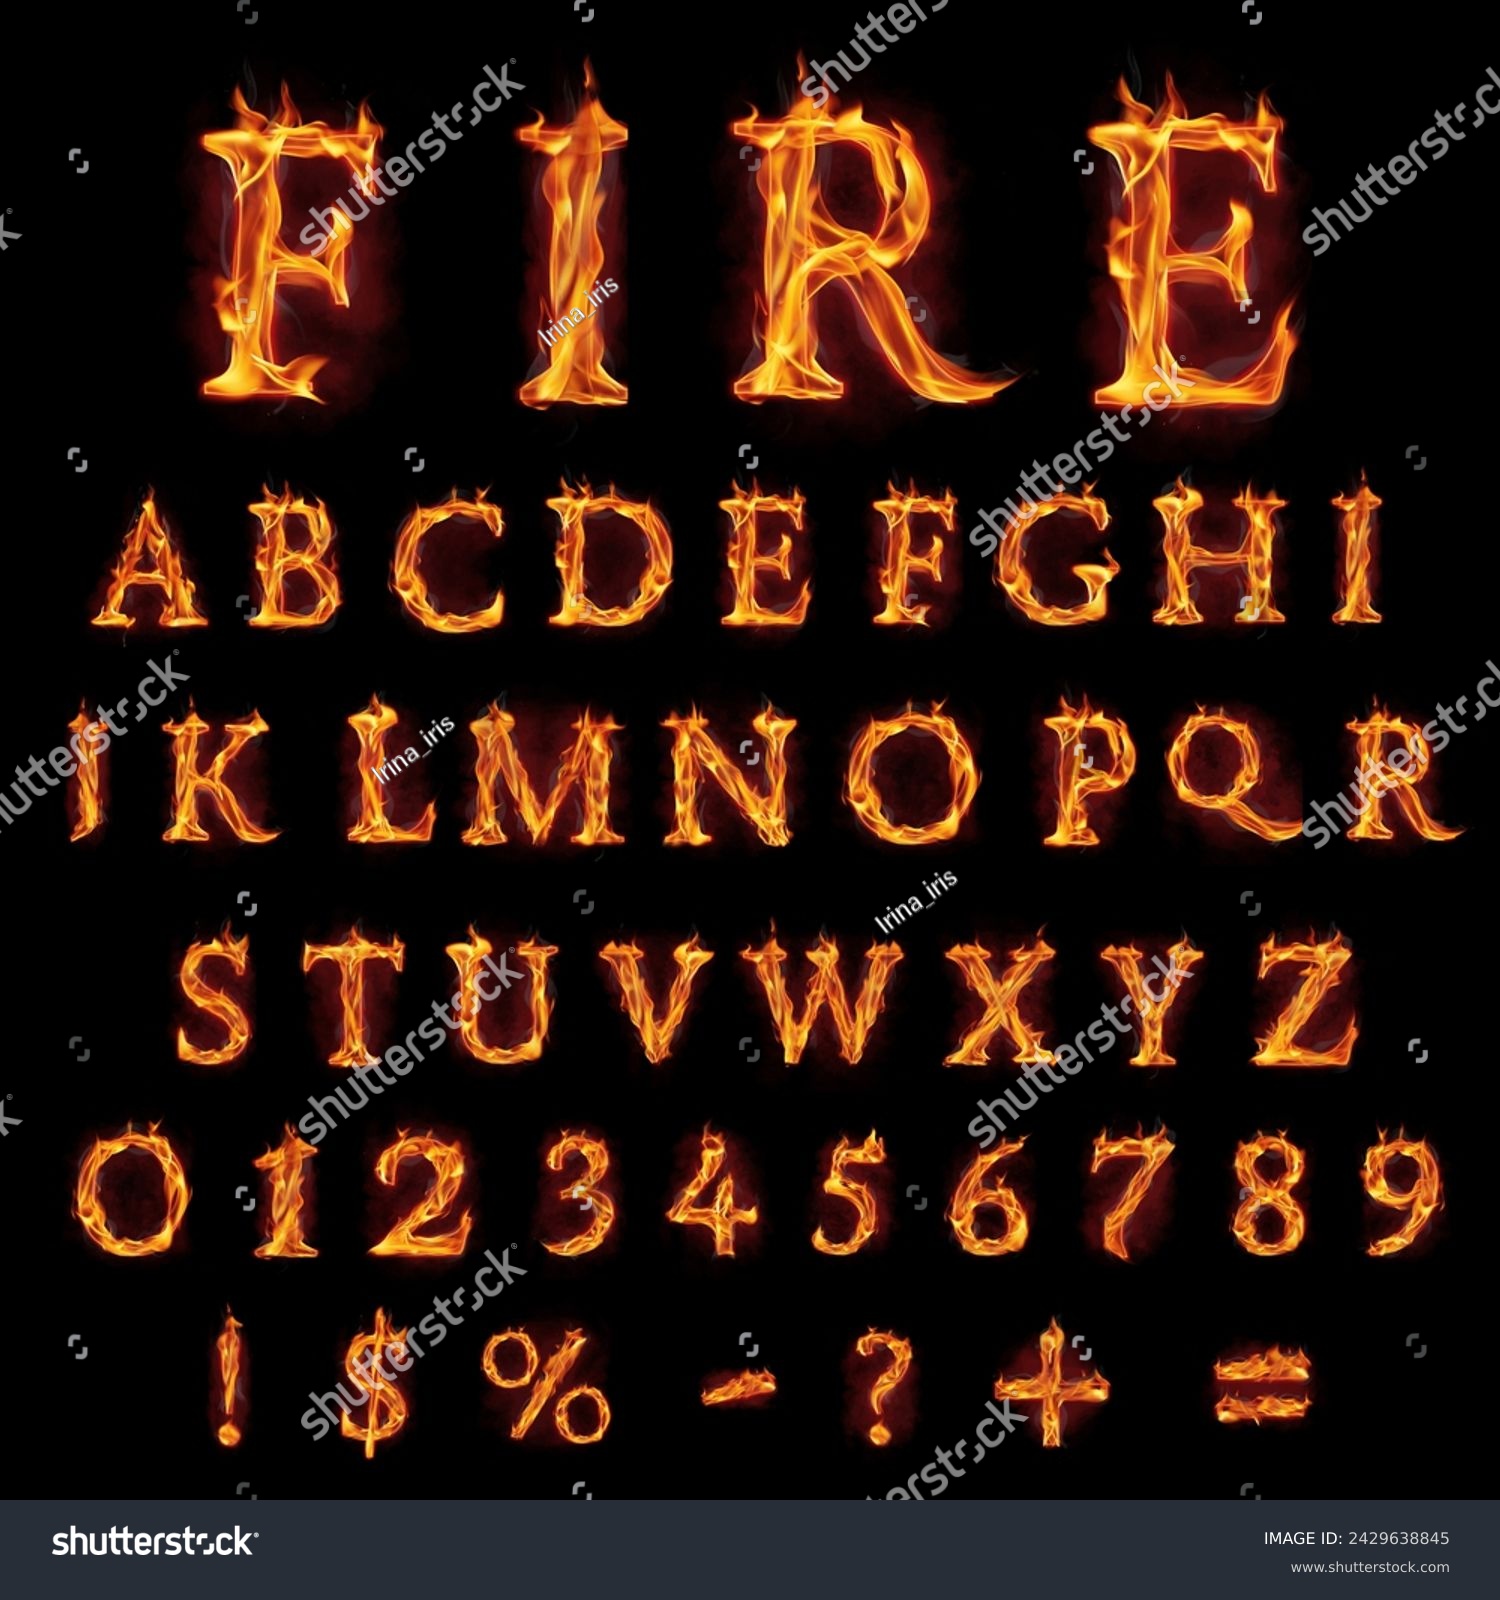 Stylish set of fire alphabet, all letters, numbers and main symbols made of fire flames, with red smoke behind. Hot metal font in flames, isolated on black #2429638845